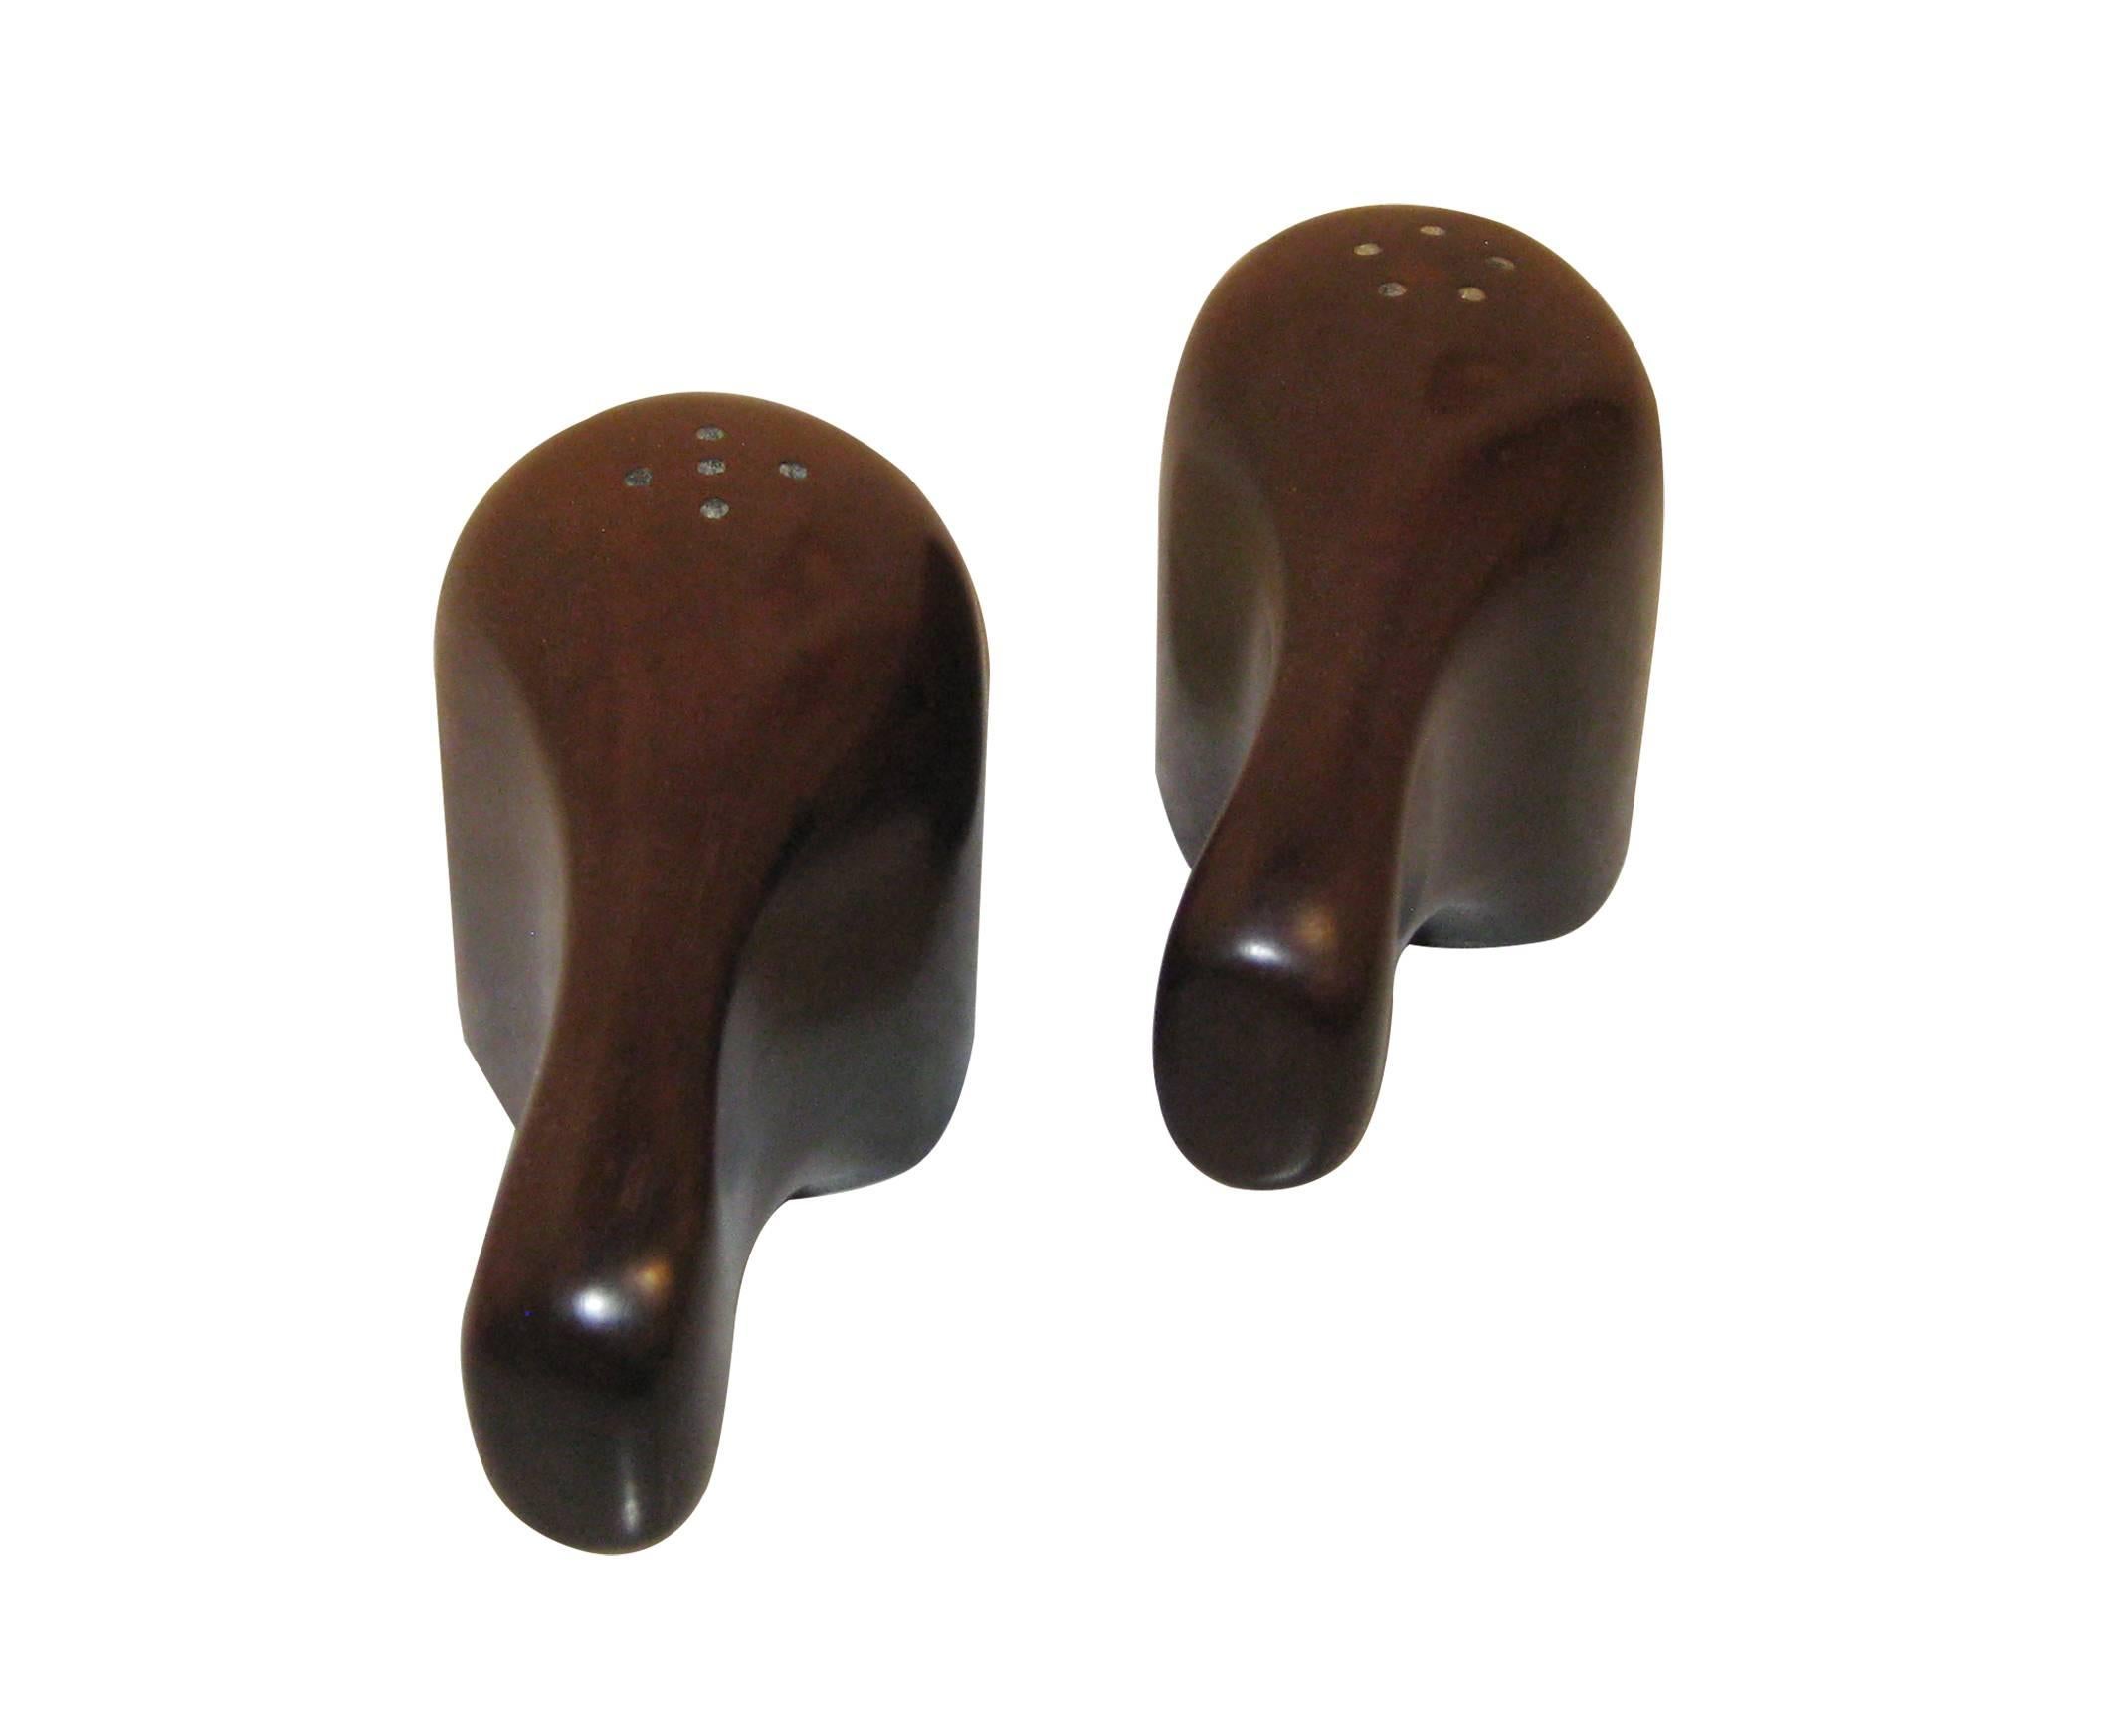 Mexican Interlocking Rosewood Condiment Shakers by Don Shoemaker, circa 1960